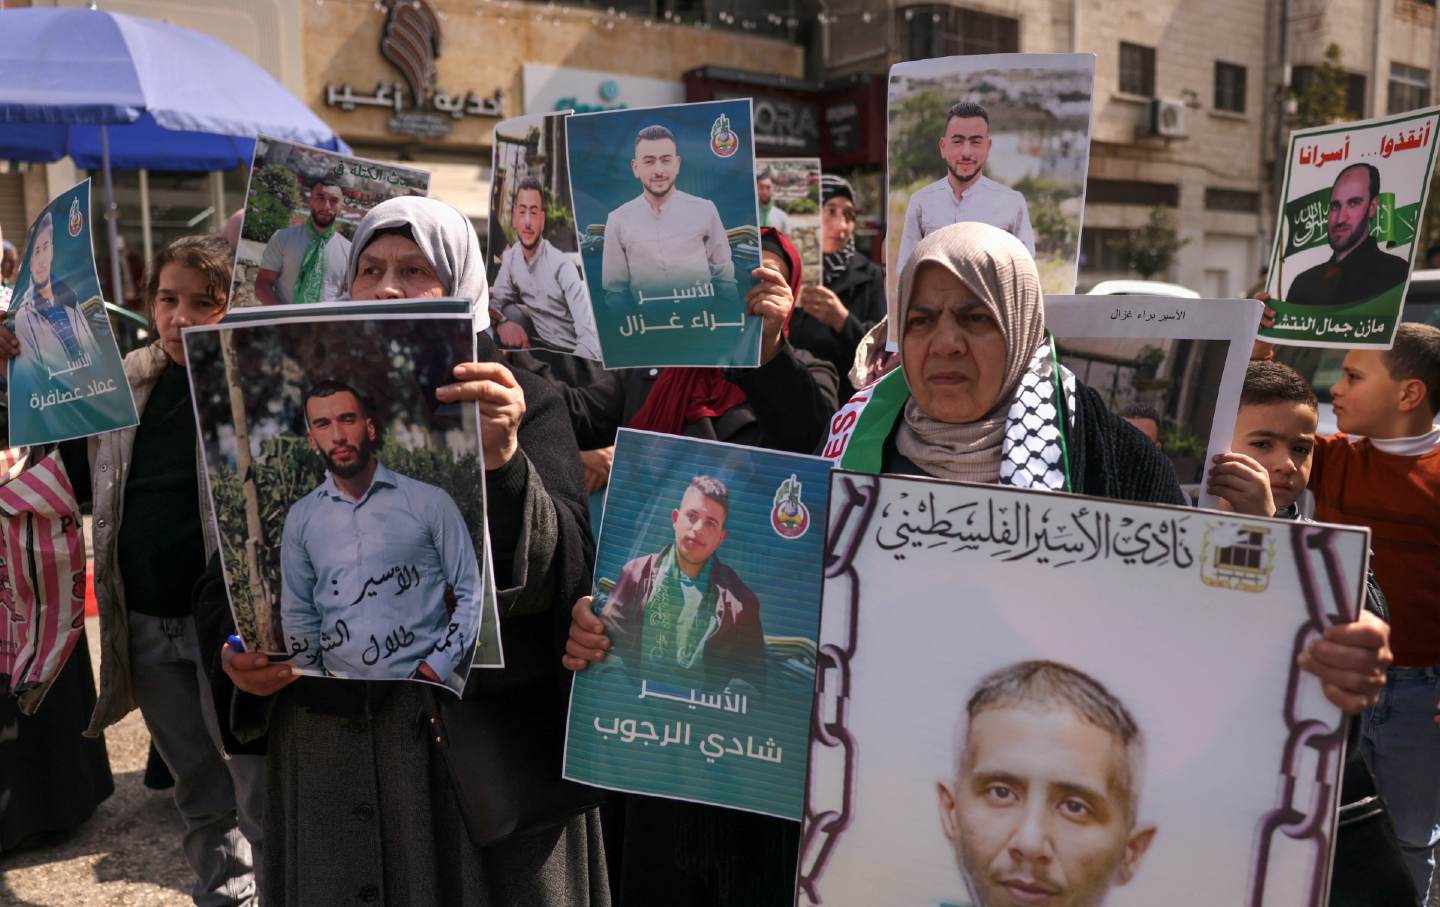 Relatives and friends of Palestinians imprisoned in Israel hold up signs at a rally calling for the release and return of the bodies of those killed in prison, in Hebron in the occupied West Bank on February 27, 2024.